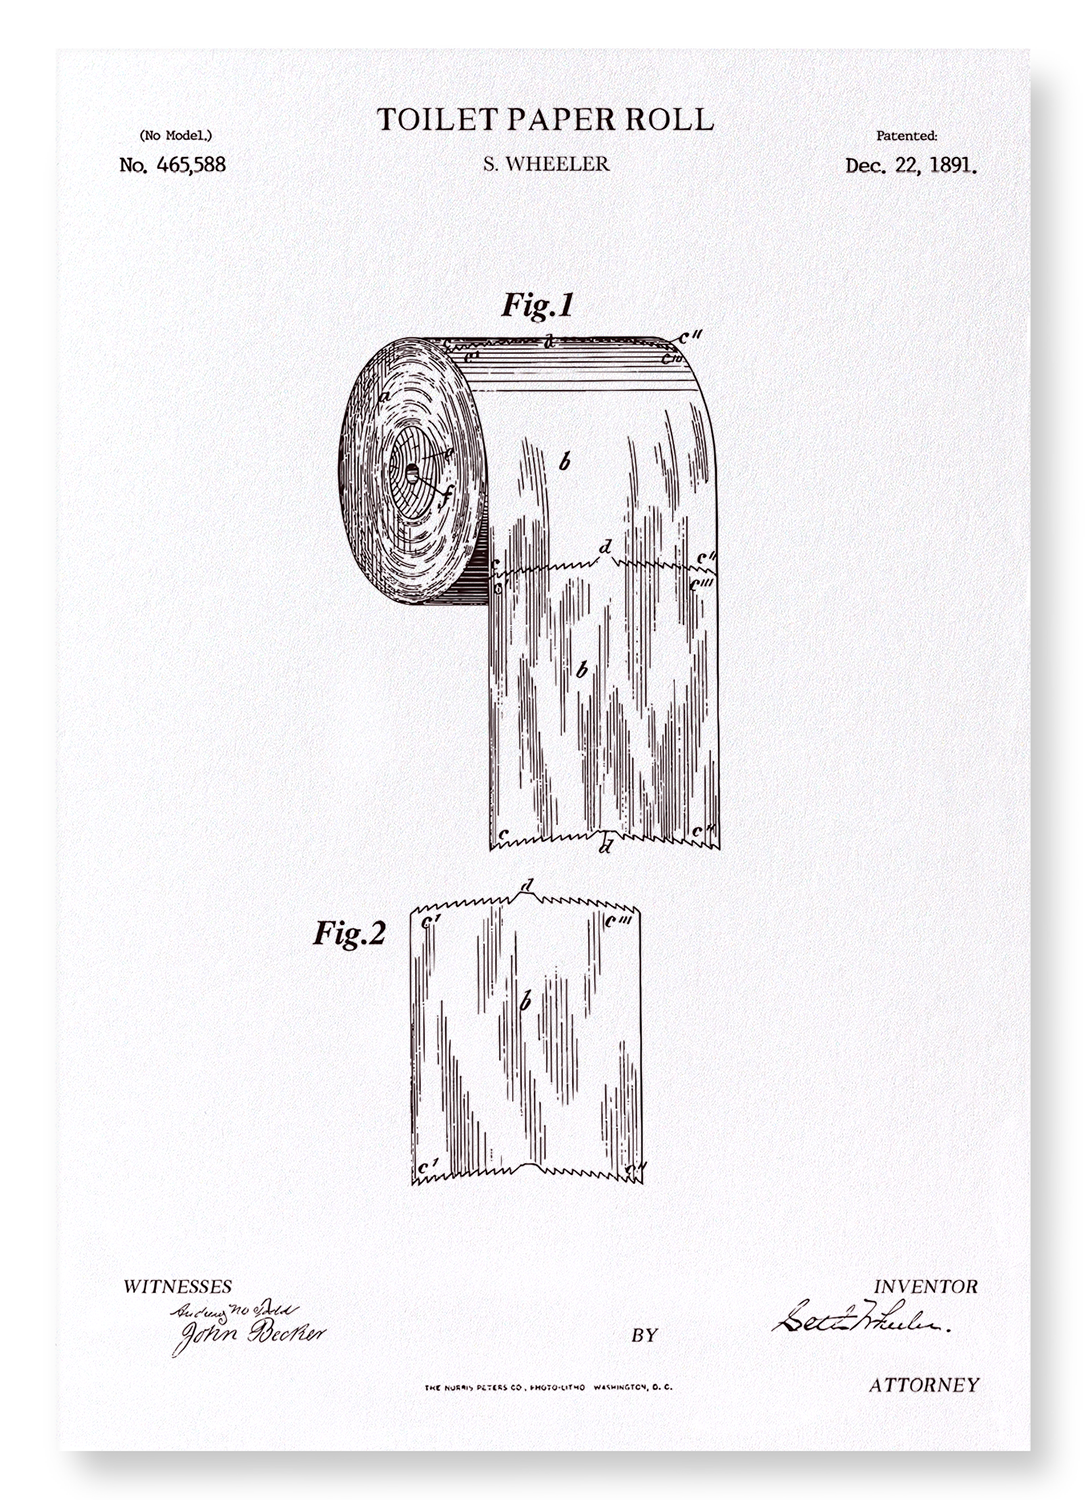 PATENT OF TOILET PAPER ROLL (1891)